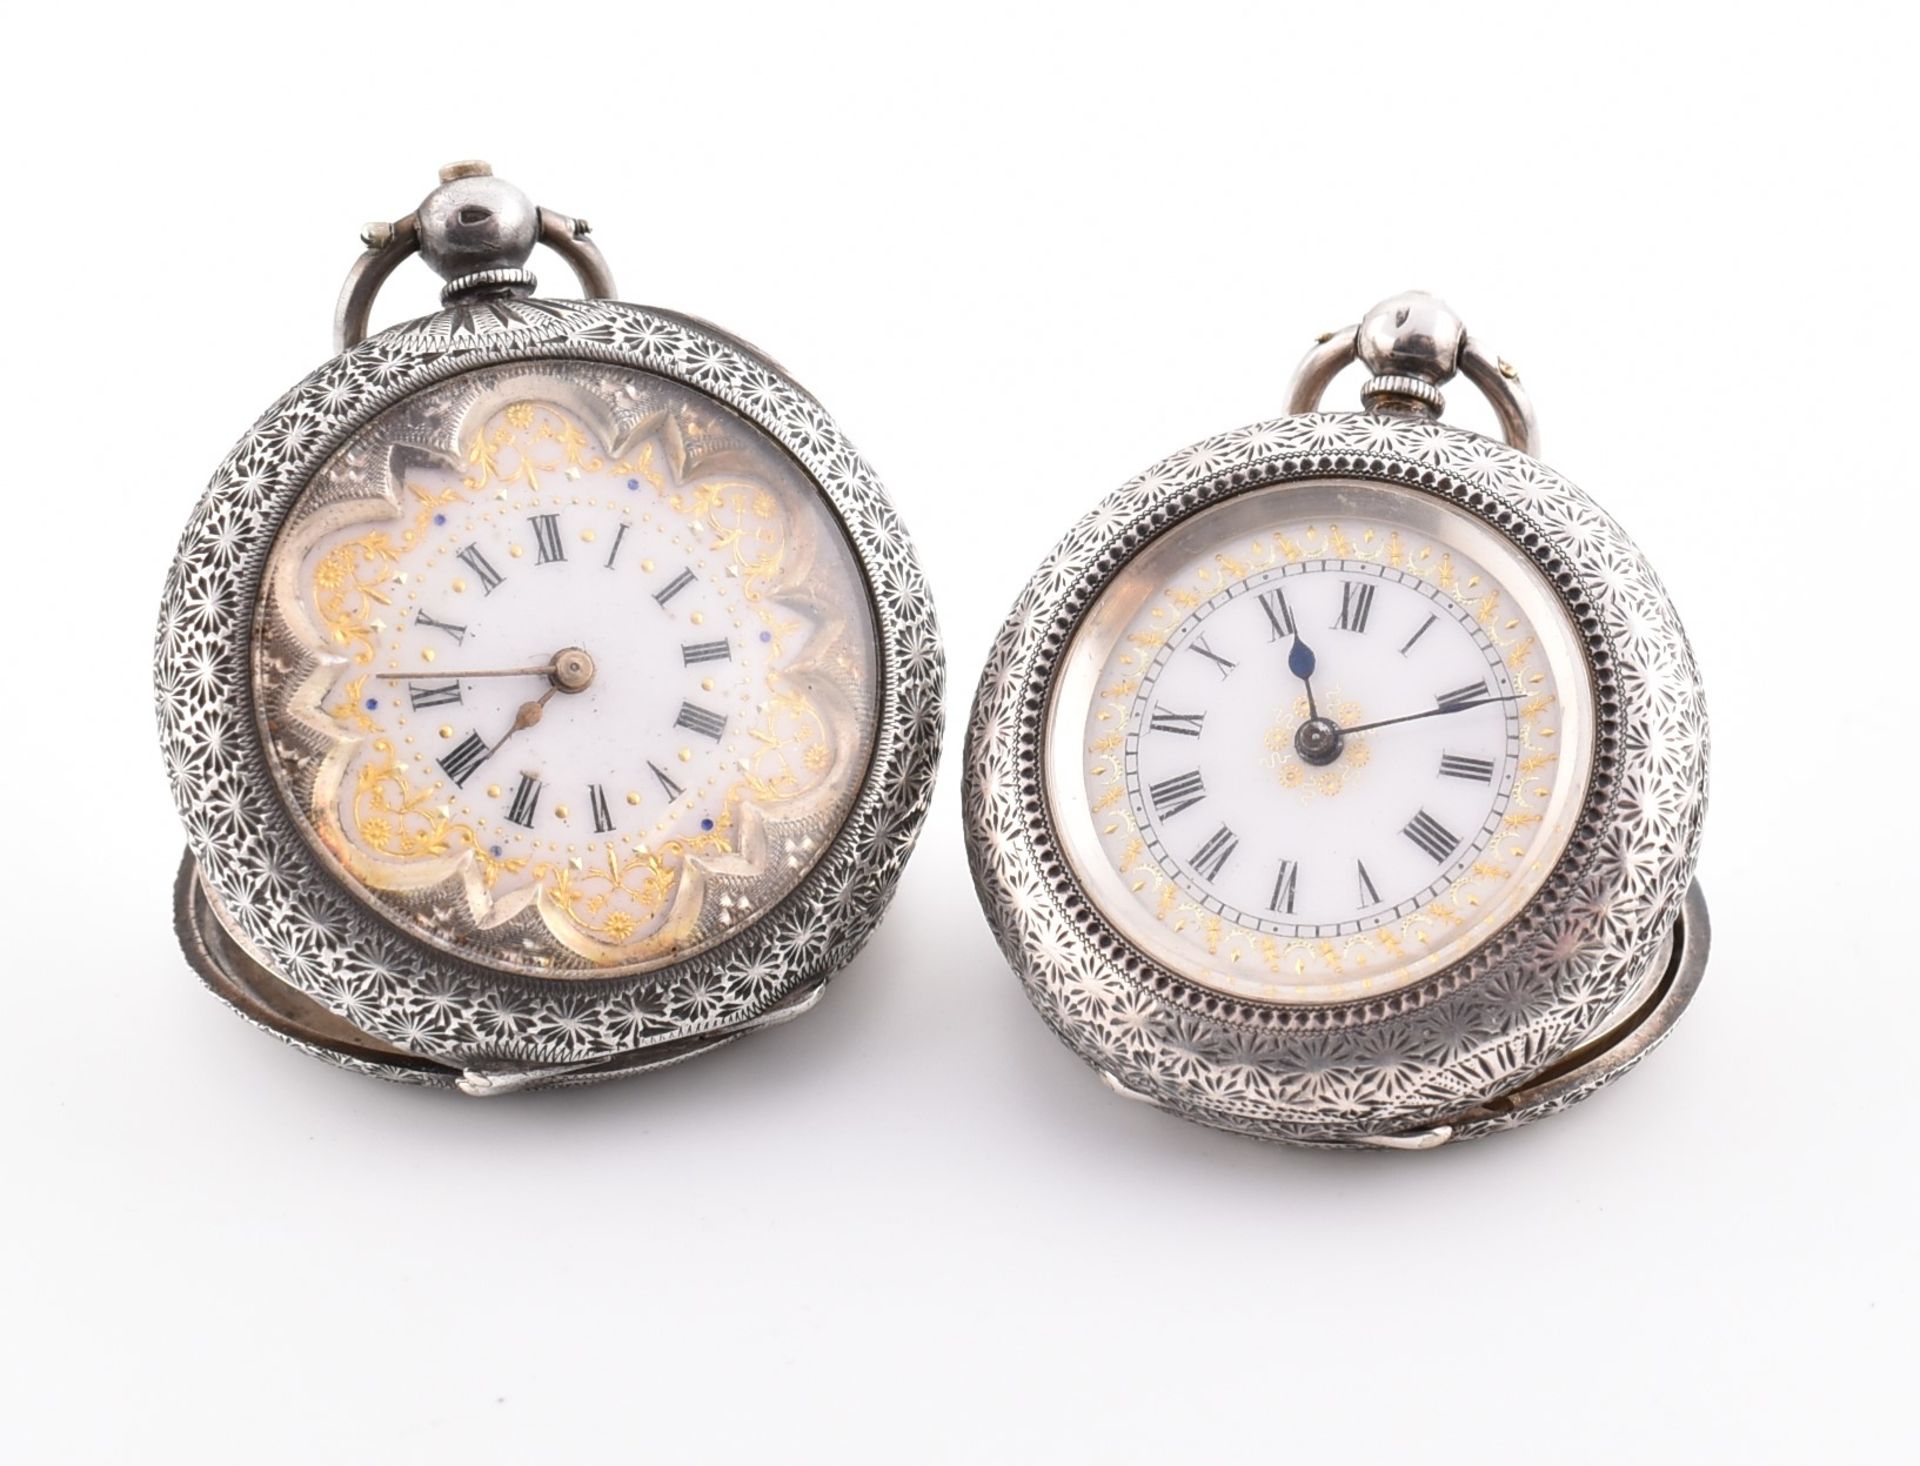 TWO SWISS 935 SILVER POCKET WATCHES 1888 - 1914